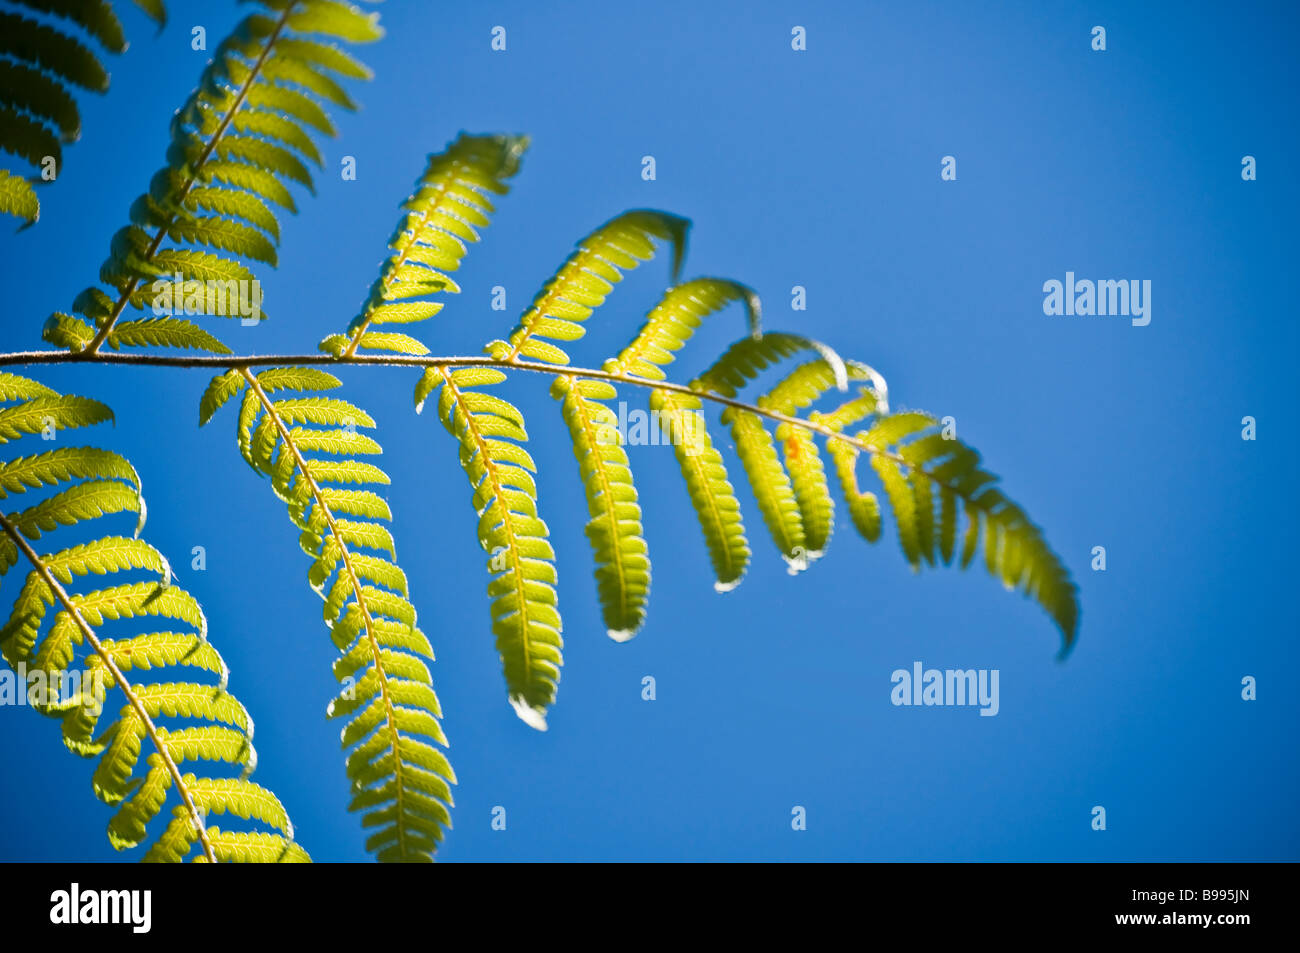 The silver tree fern Cyathea dealbata from All Blacks rugby jersey fame against a New Zealand icon with vignette Stock Photo